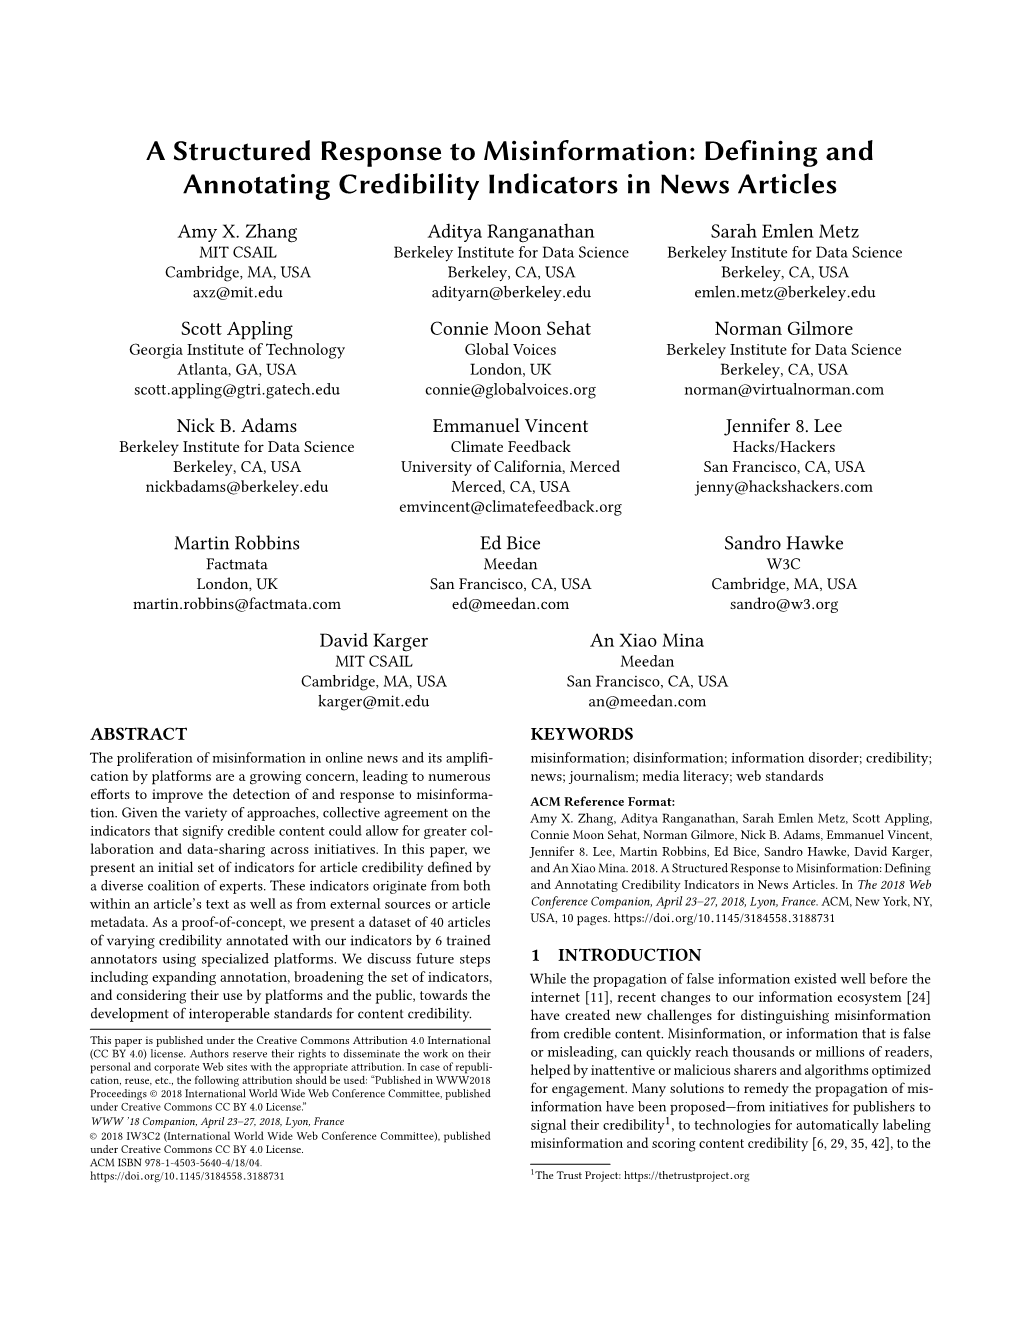 Defining and Annotating Credibility Indicators in News Articles